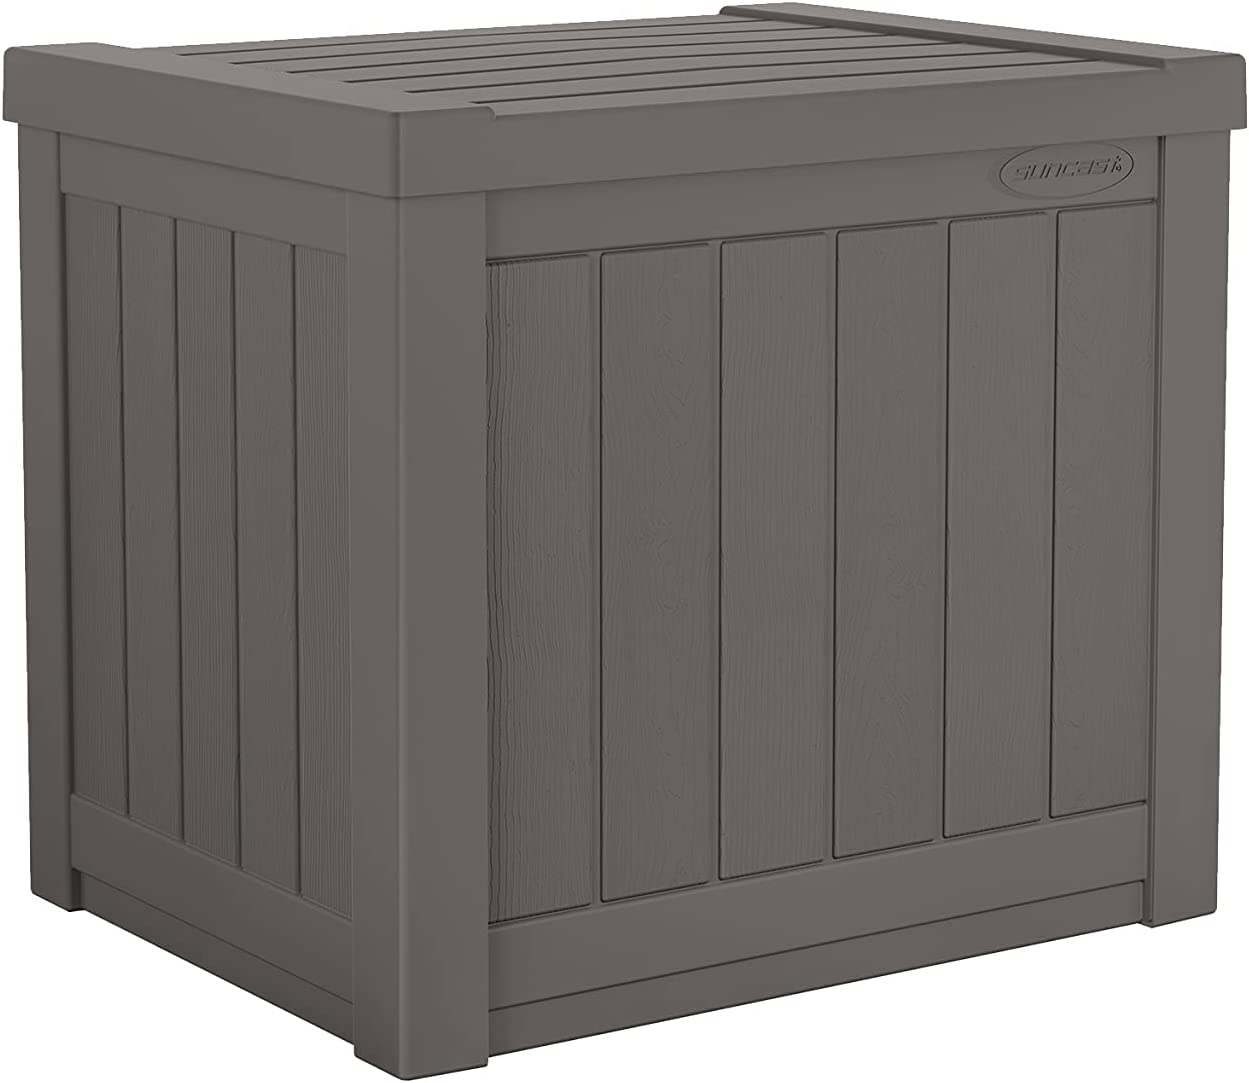 https://bigbigmart.com/wp-content/uploads/2023/05/Suncast-22-Gallon-Small-Deck-Box-Lightweight-Resin-Indoor-Outdoor-Storage-Container-and-Seat-for-Patio-Cushions-and-Gardening-Tools-Store-Items-on-Patio-Garage-Yard-Stone-Gray.jpg